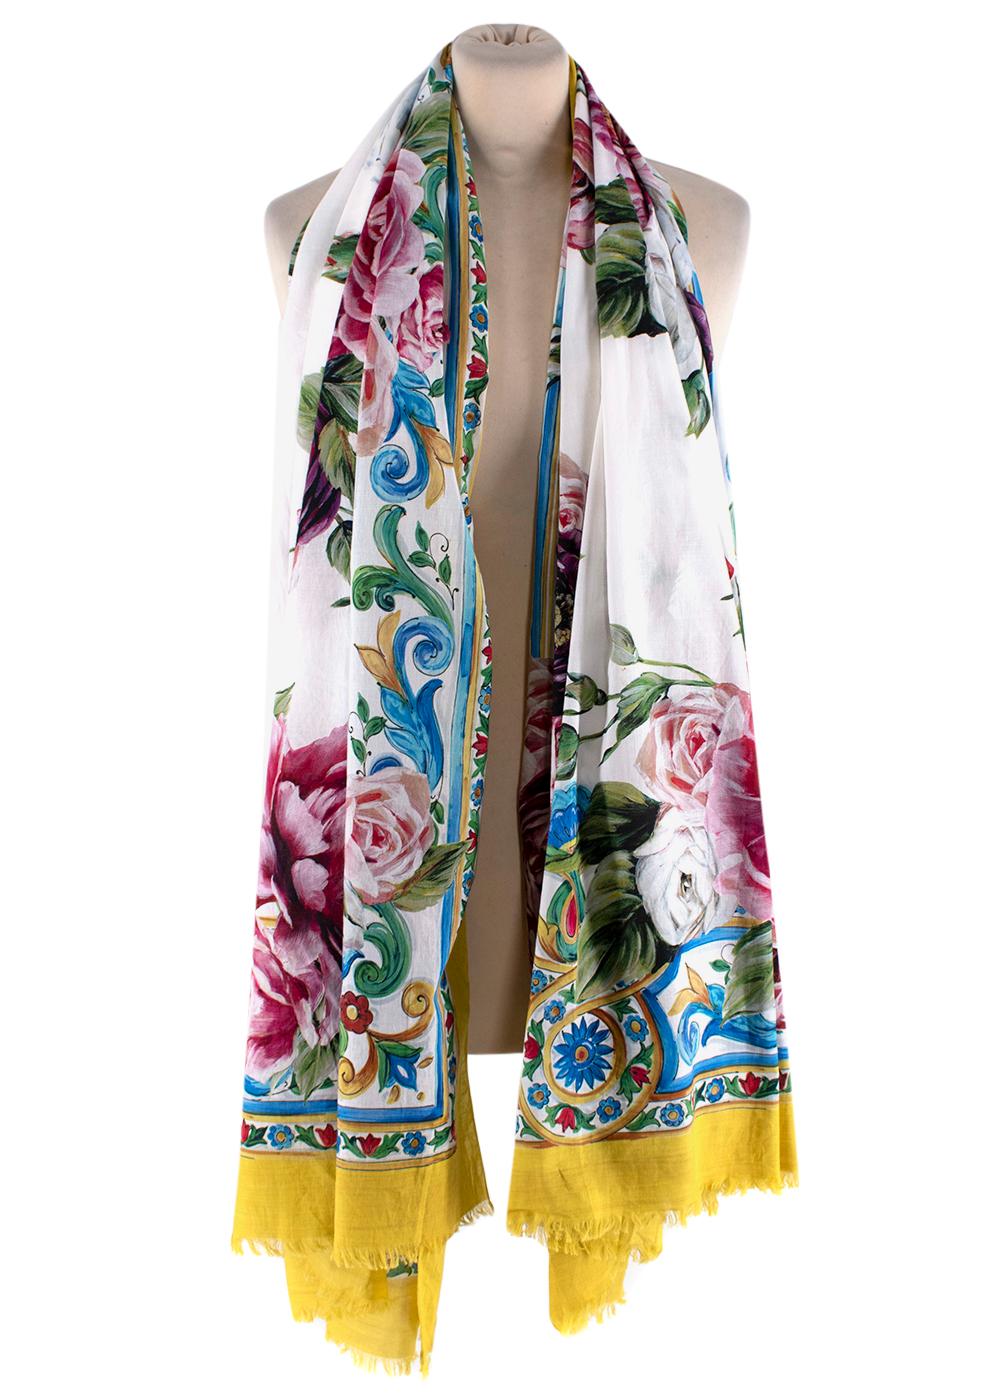 Dolce & Gabbana Majolica Roses Cotton Pareo Shawl
 

 - Yellow edged lightweight cotton pareo featuring roses & majolica motifs
 - To be worn as a beach sarong around the waist, or wrapped around the body as a shawl
 

 

 Materials
 100% cotton
 

